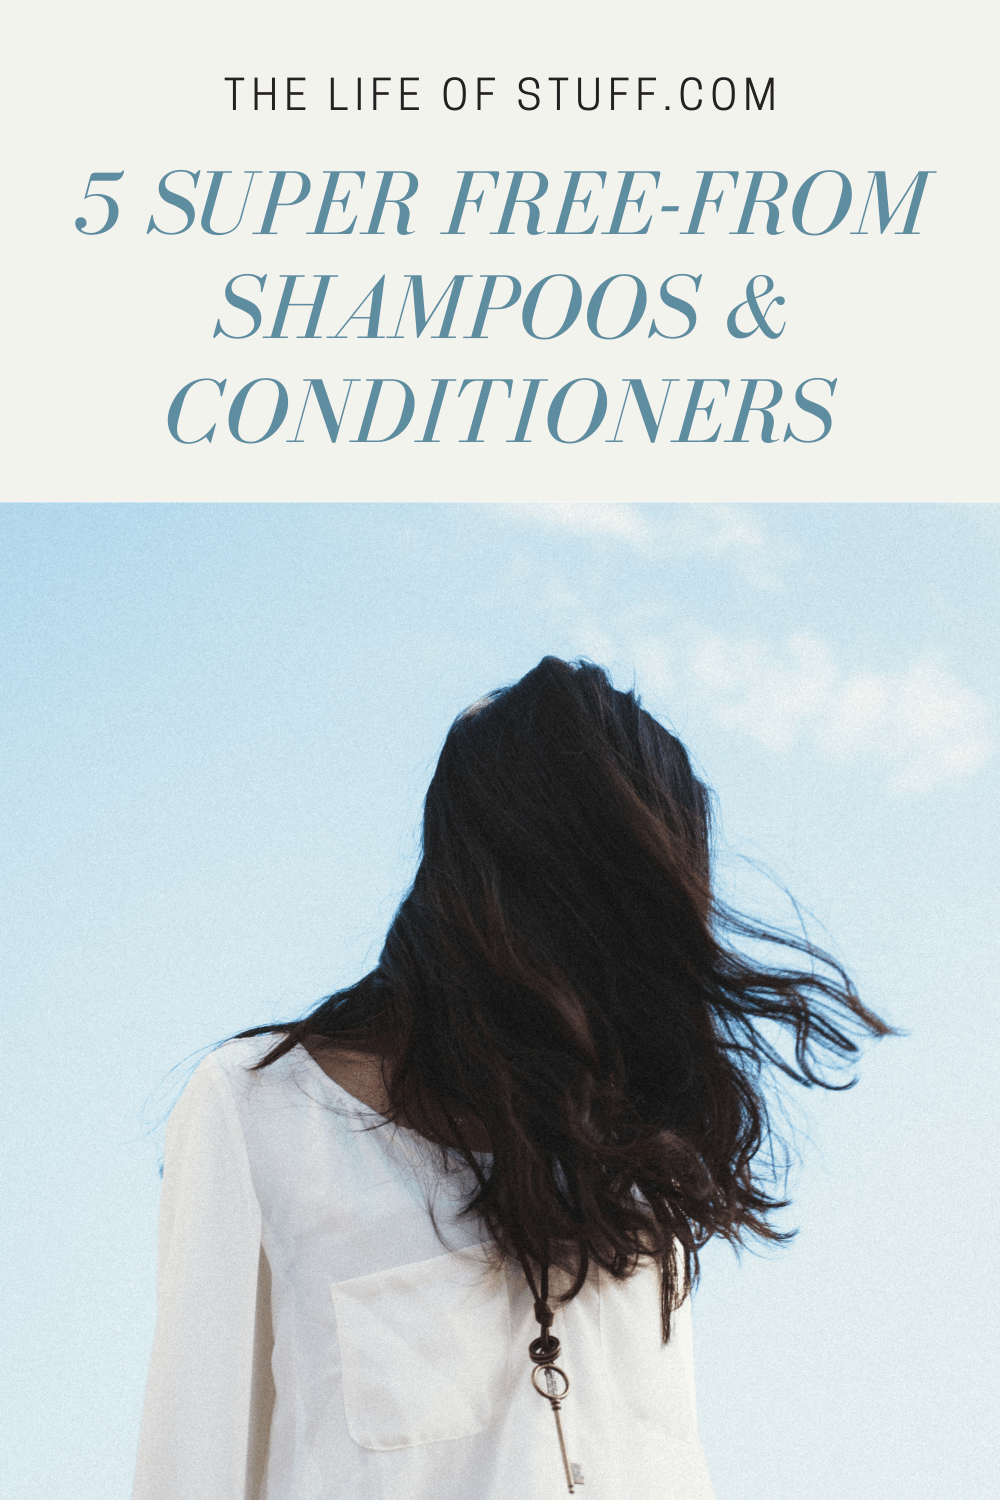 5 Super Free-From Shampoos And Conditioners - The Life of Stuff